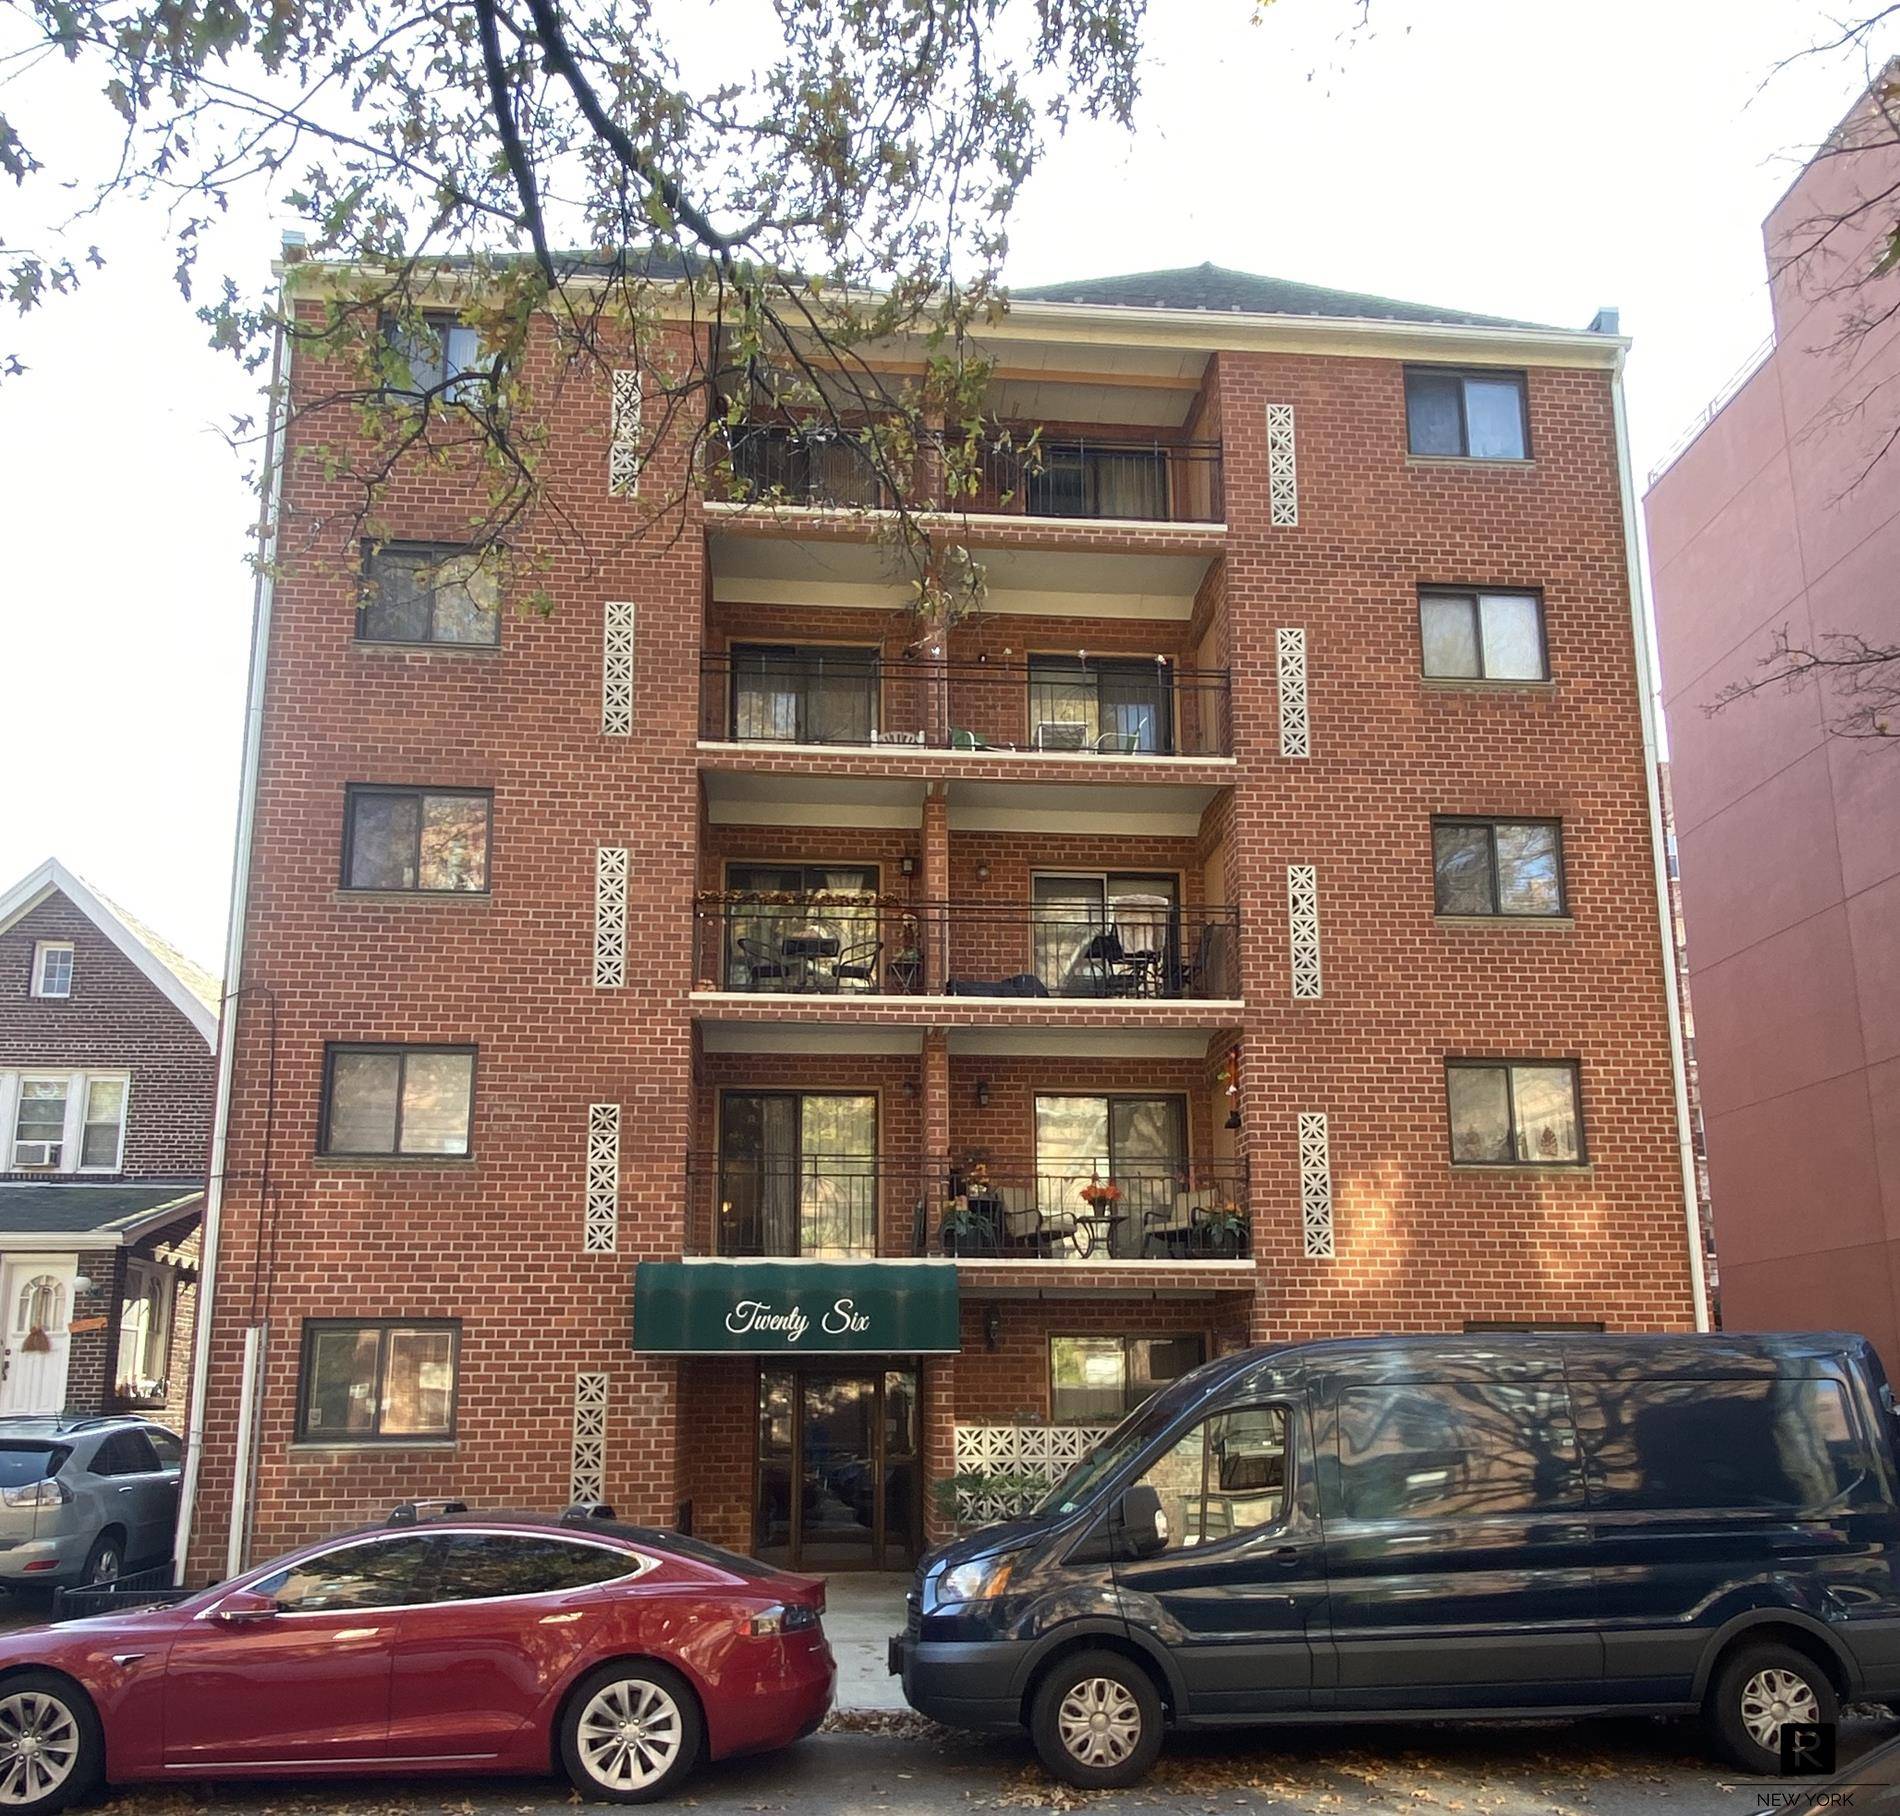 Two bedroom co op located on a charming one block through street in Bay Ridge just half a block from Shore Road's magnificent water front park.